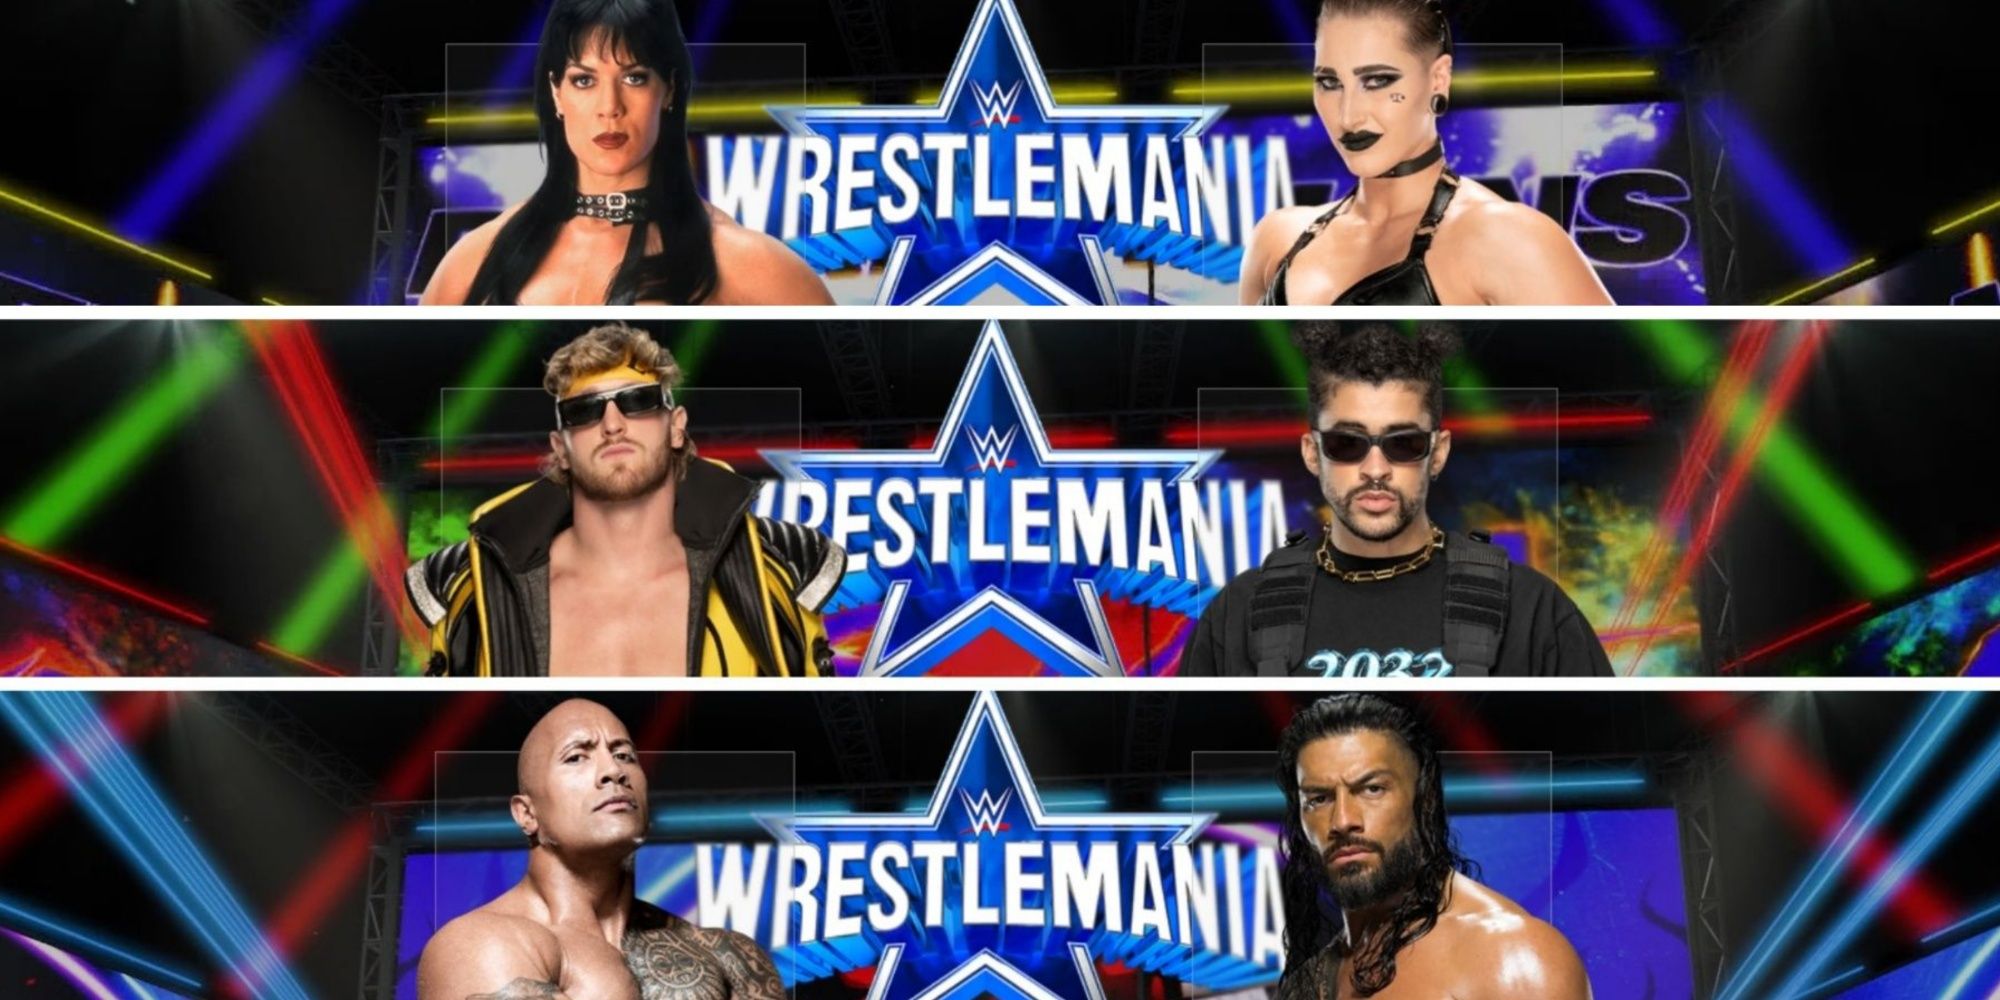 Split images of Chyna Vs Rhea Ripley, Logan Paul Vs Bad Bunny, and The Rock Vs Roman Reigns in WWE 2K23 dream matches.